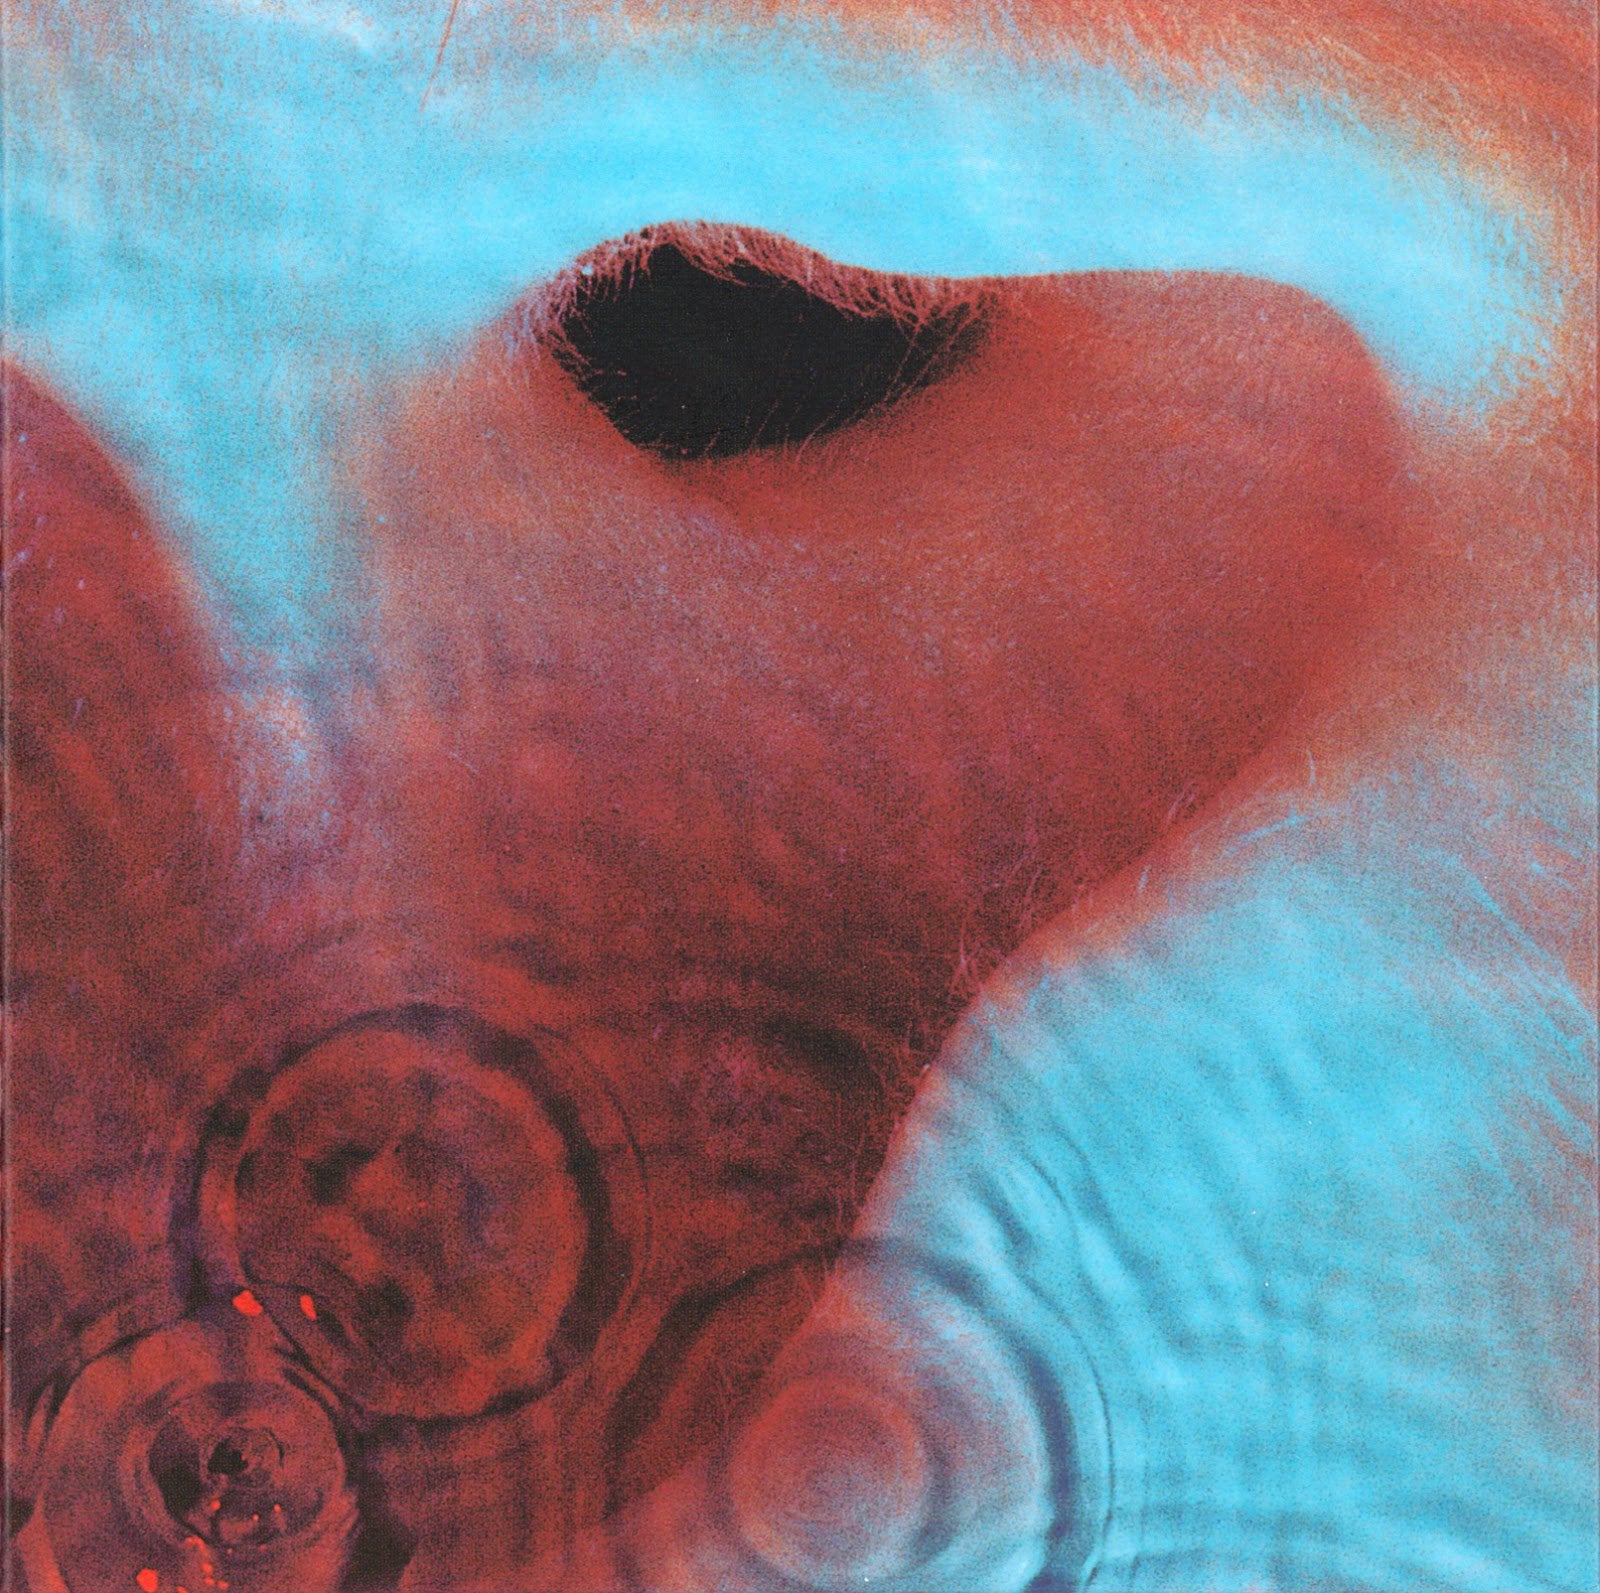 Anyone think Meddle might be Pink Floyd's best album?